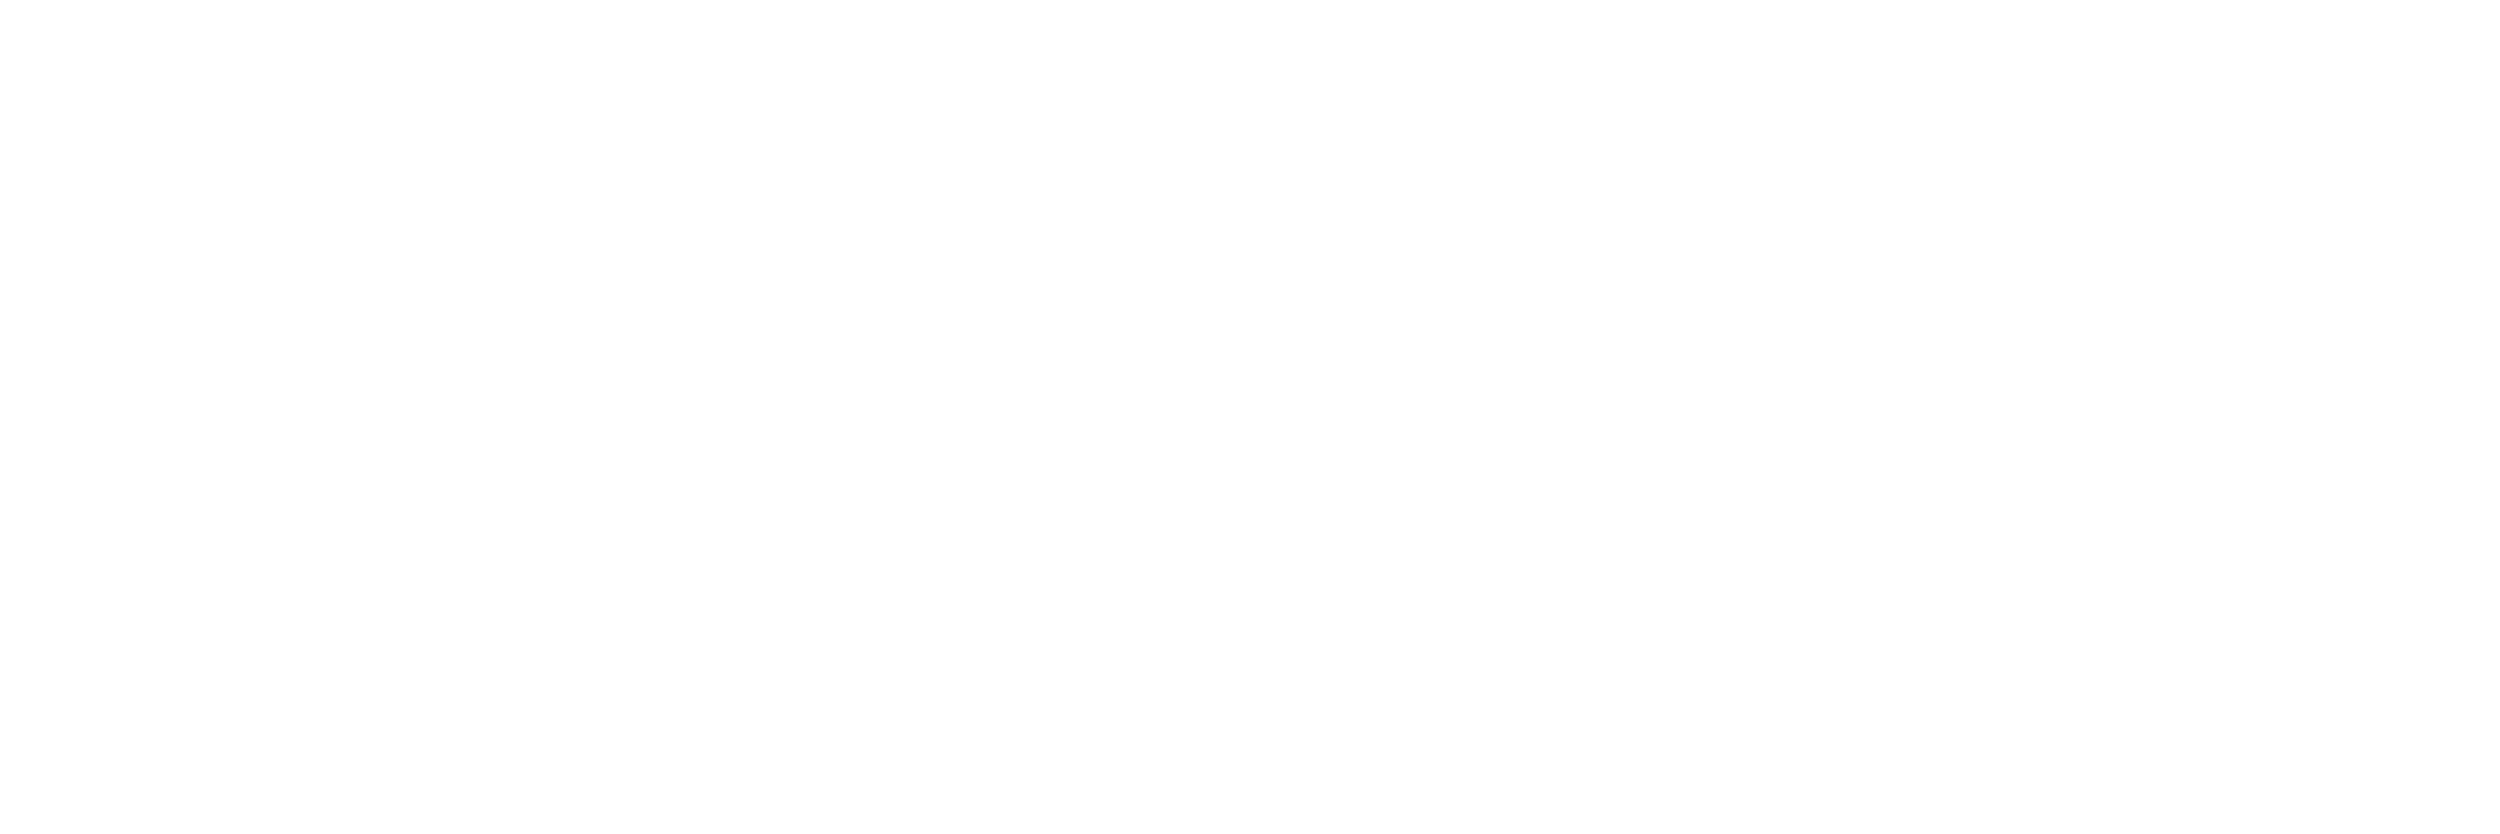 Madness and Magic